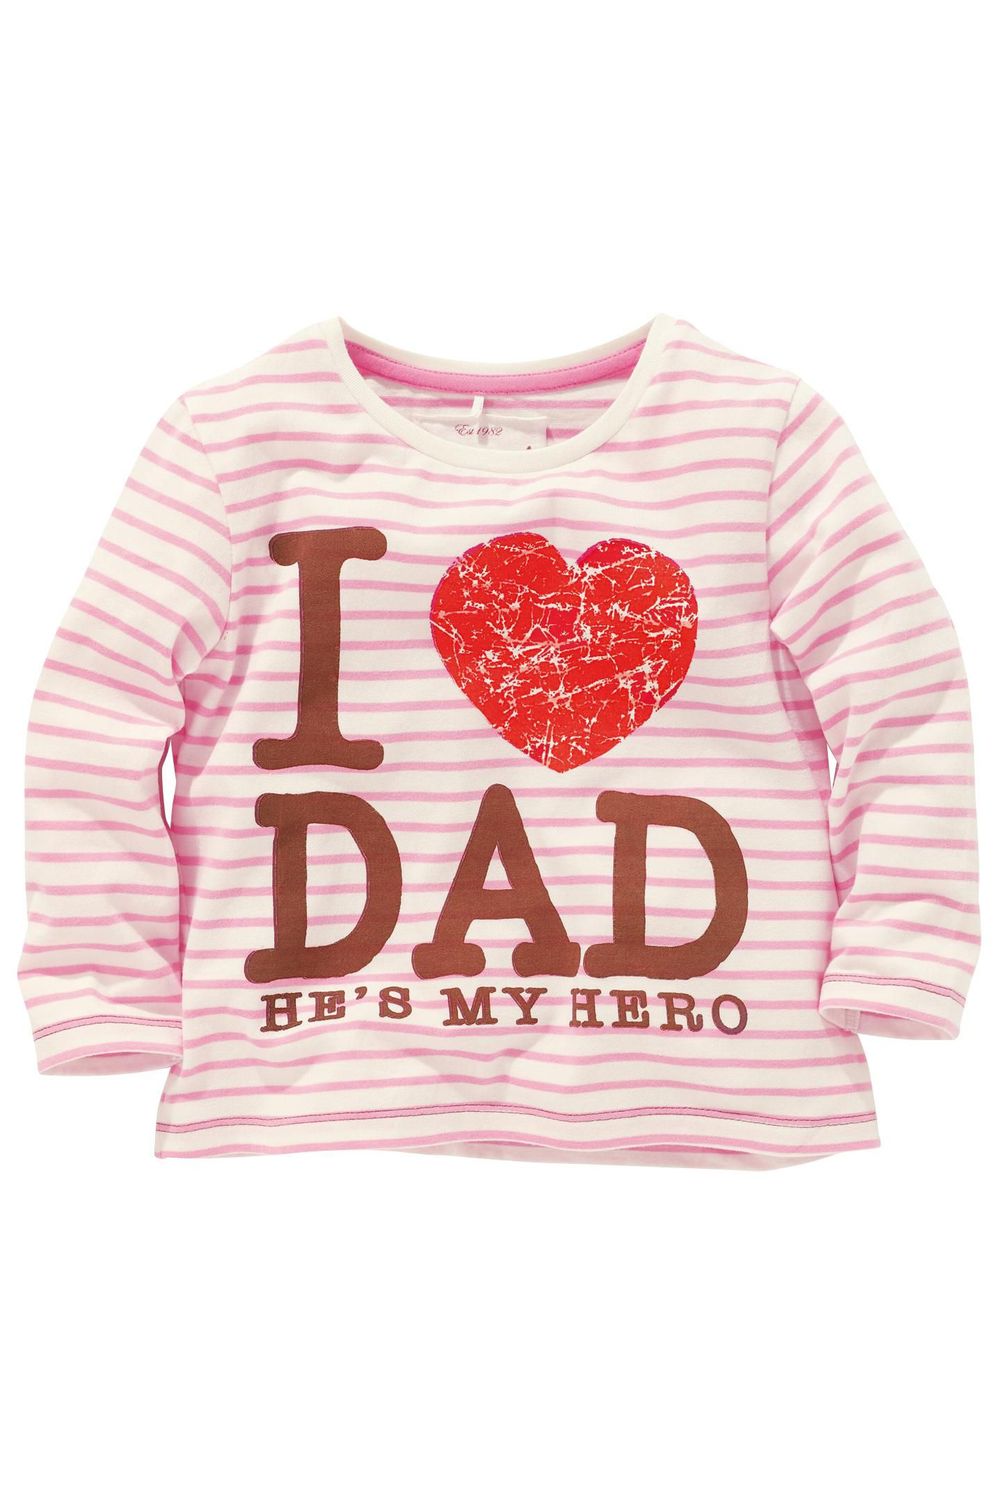 2013  New , fashion and comfortable T shirt / tee 6pcs/lot  YH-60 I LOVE DAD